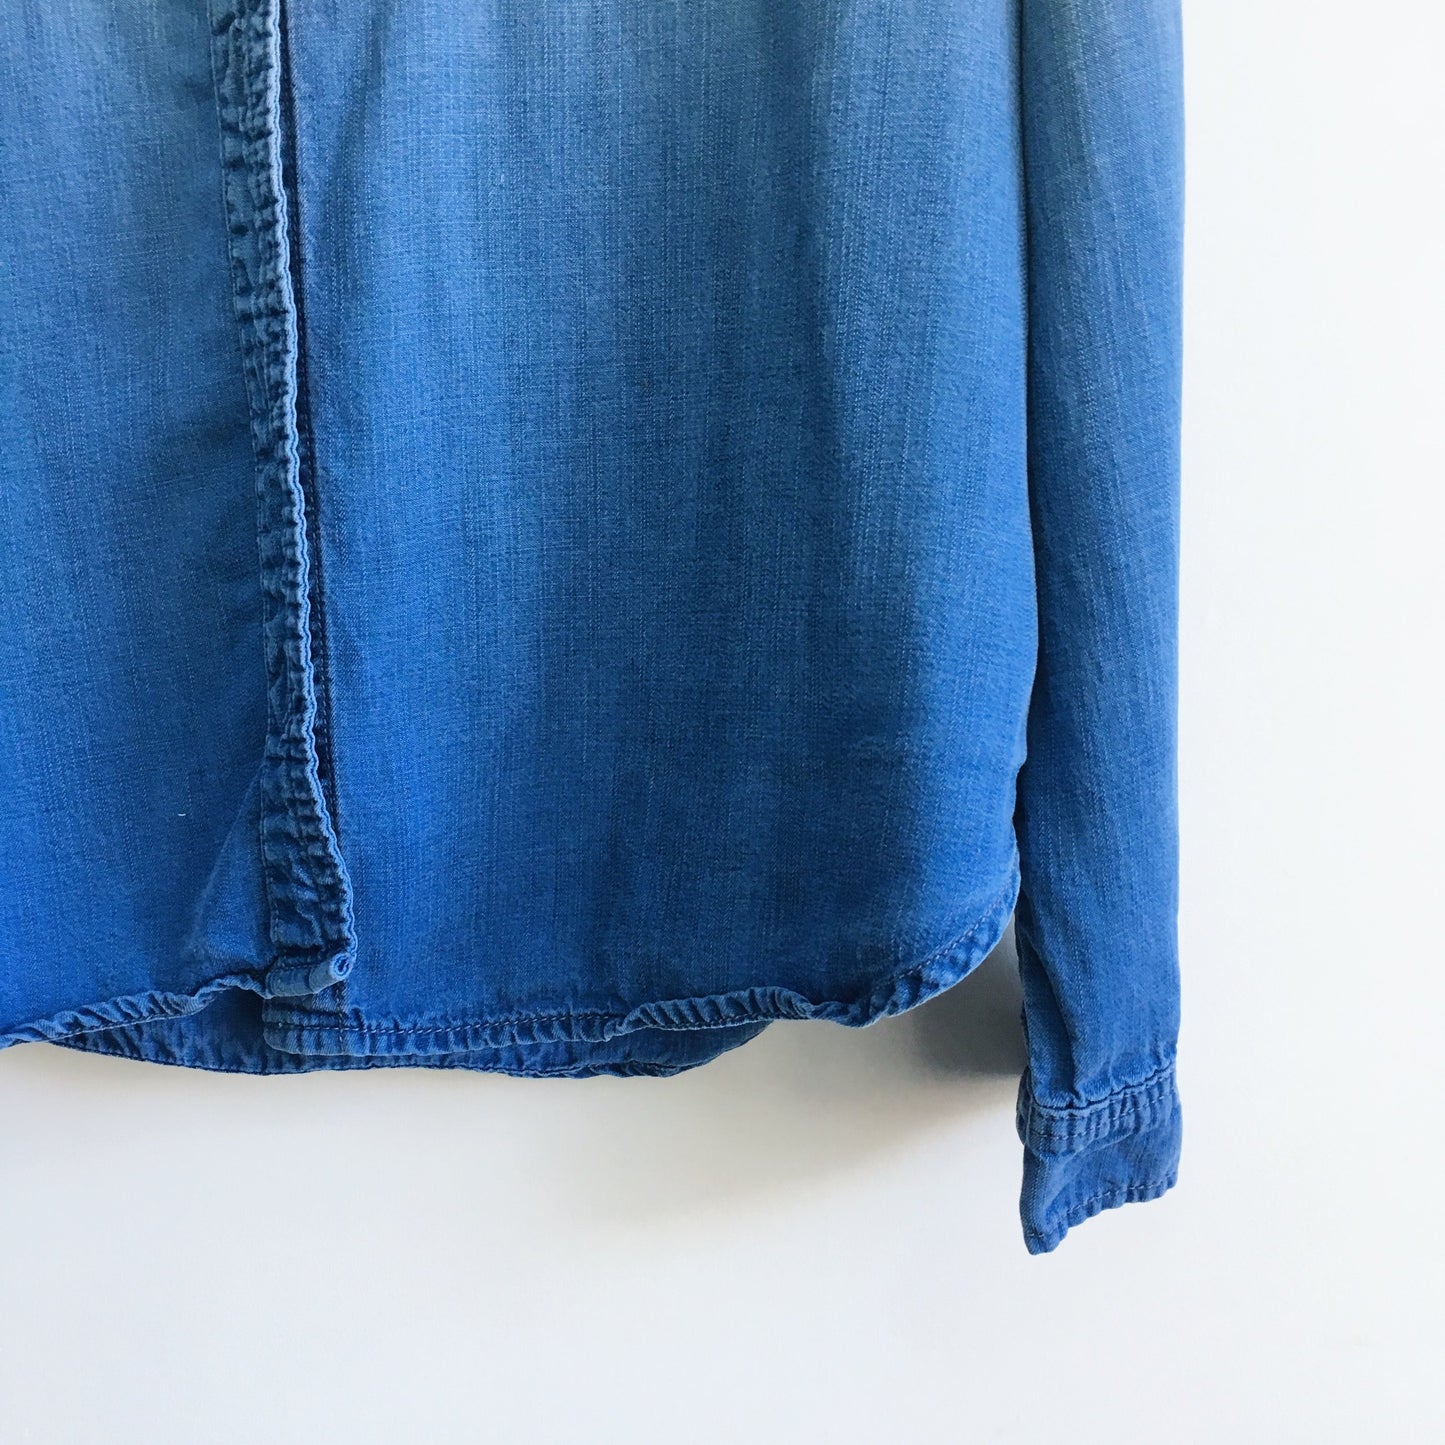 Cloth &amp; Stone Ombre Chambray Buttondown - size Large